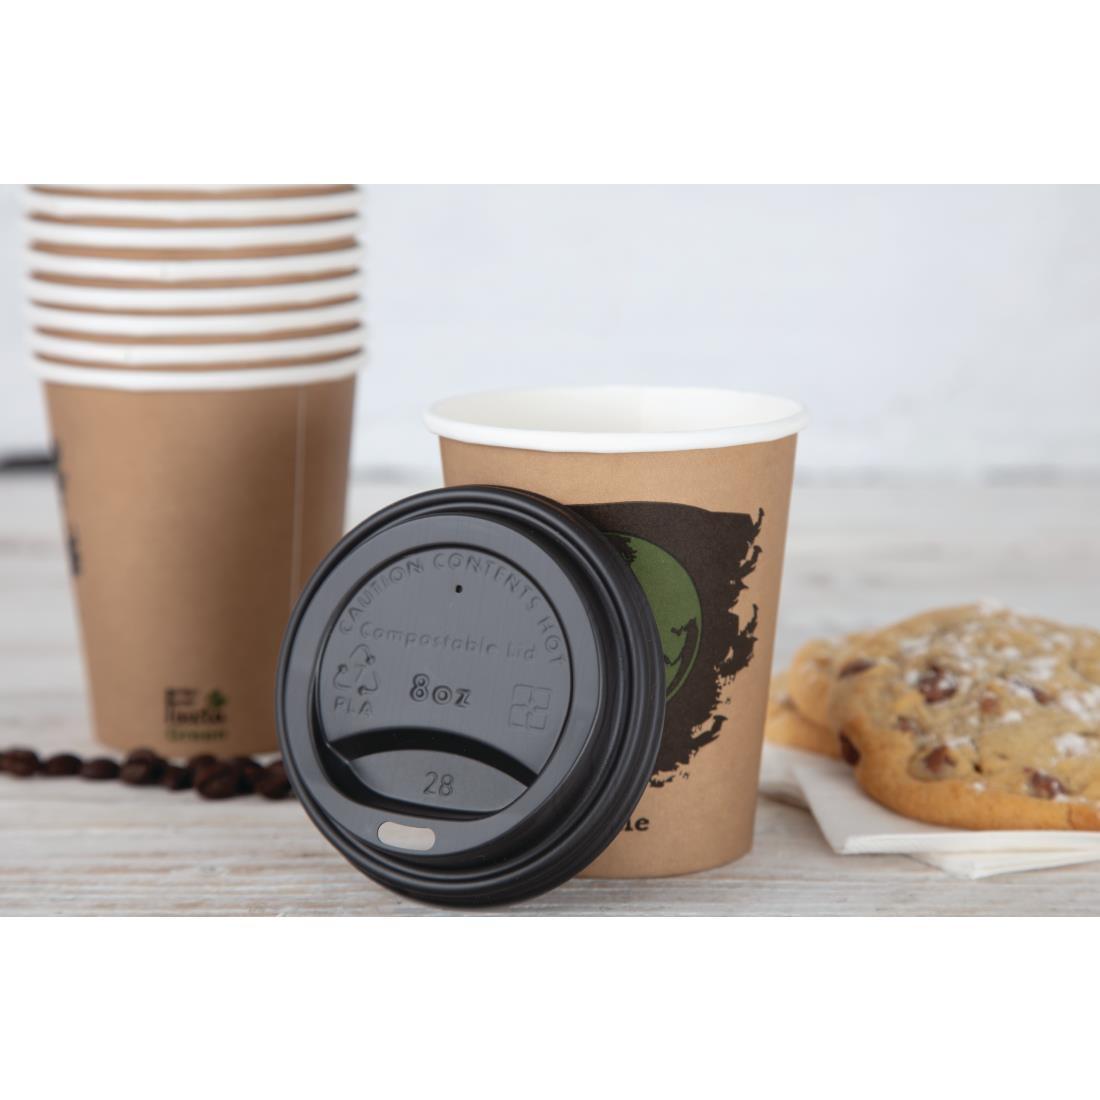 Fiesta Compostable Coffee Cups Single Wall 225ml / 8oz (Pack of 50) - DS057  - 2